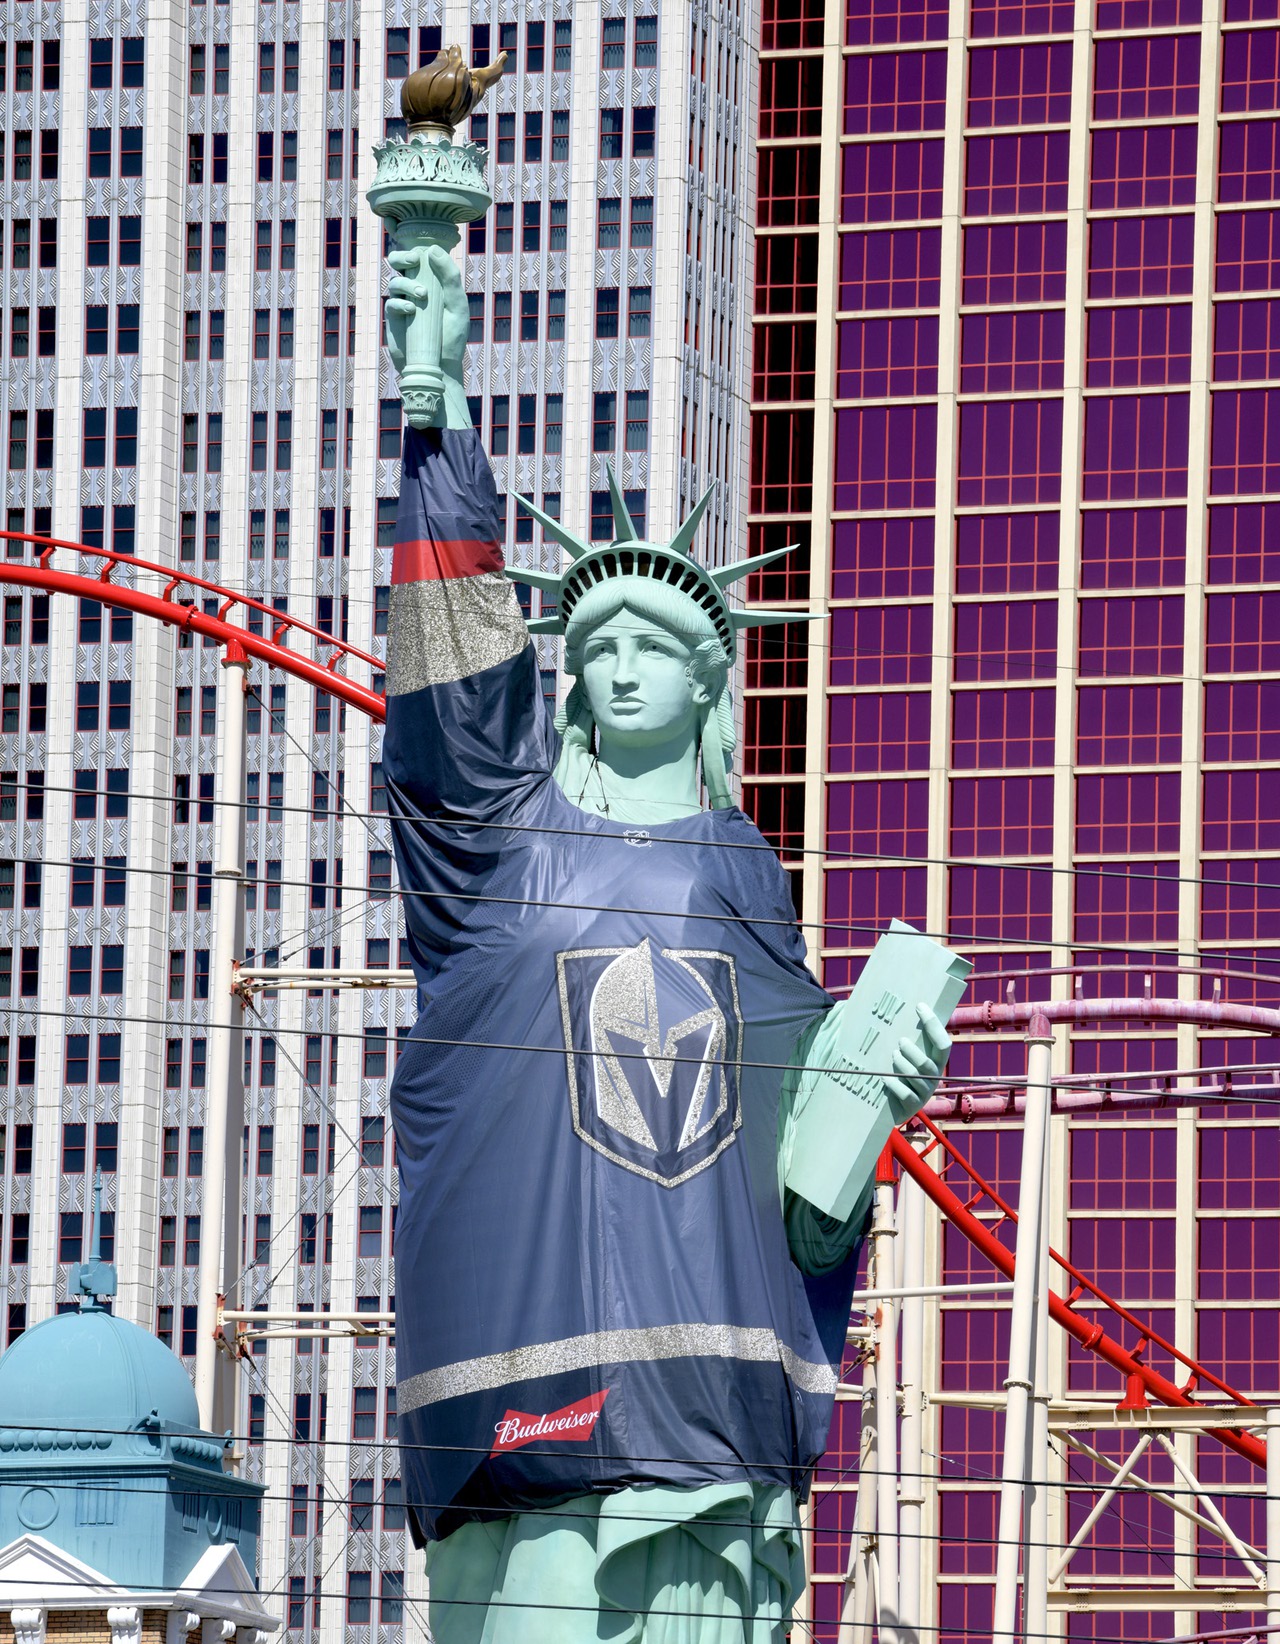 Las Vegas Review-Journal on X: Even Lady Liberty is a @GoldenKnights fan!  @NYNYVegas added a #GoldenKnights jersey to The Statue of Liberty just in  time for game two of the #StanleyCup playoffs